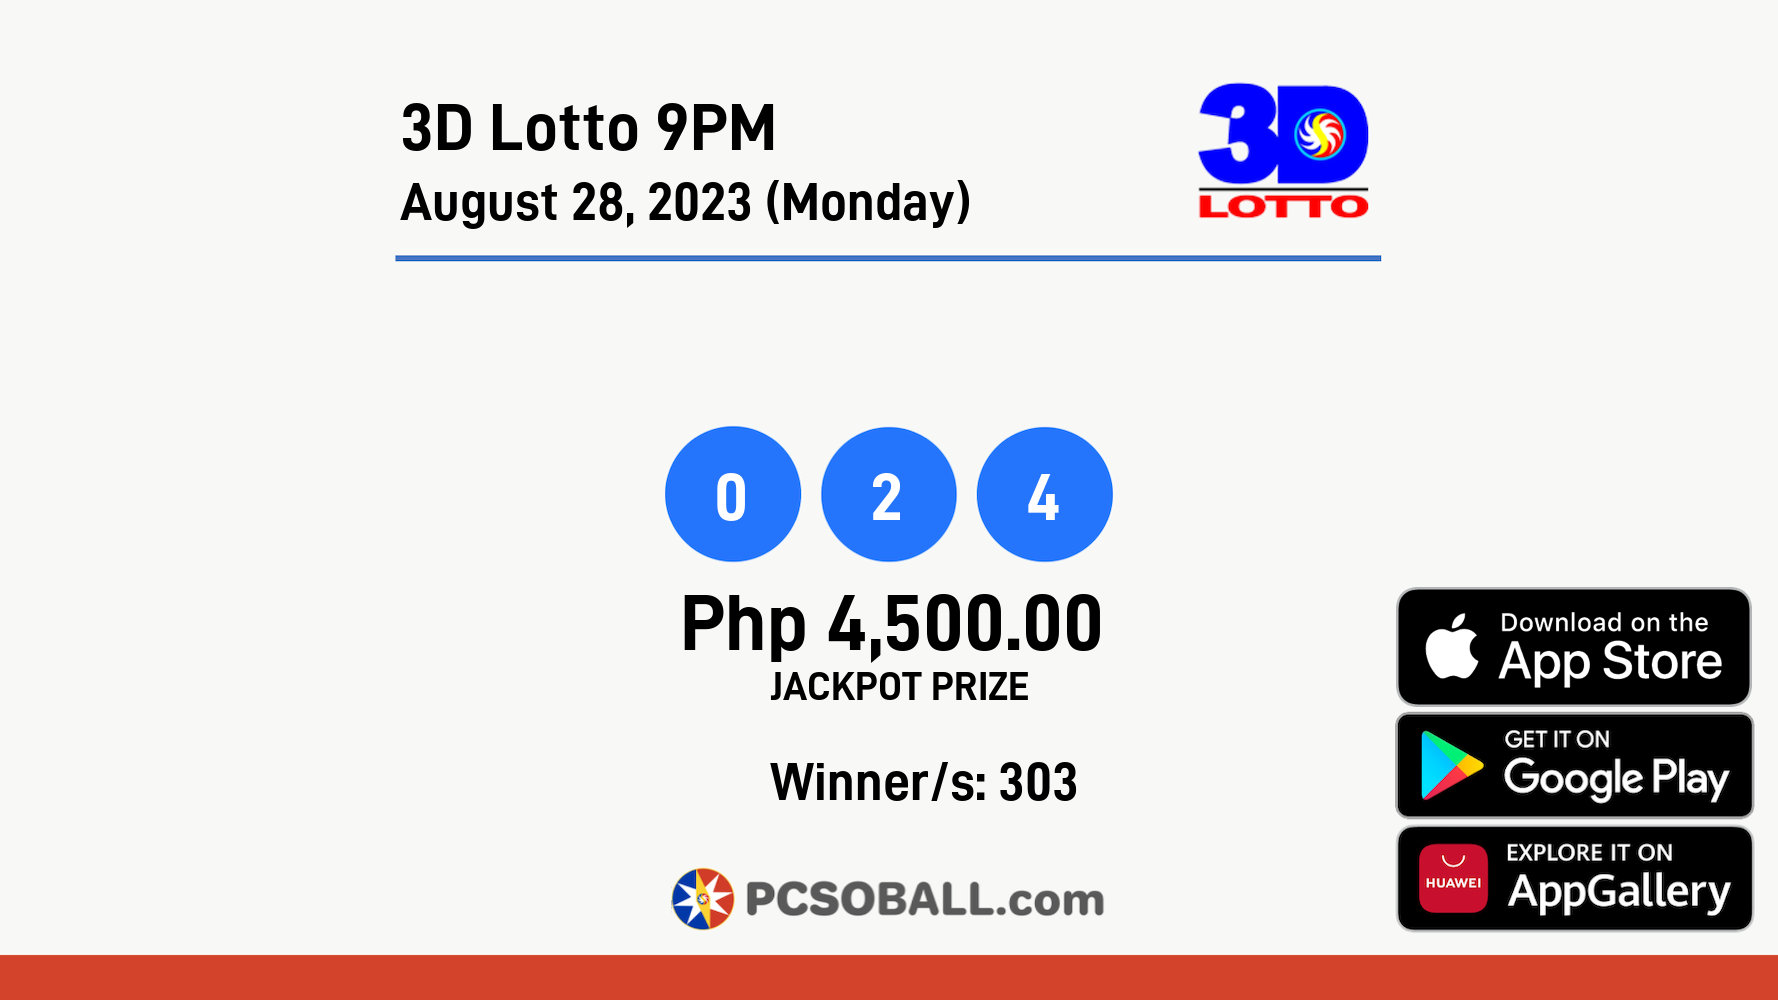 3D Lotto 9PM August 28, 2023 (Monday) Result